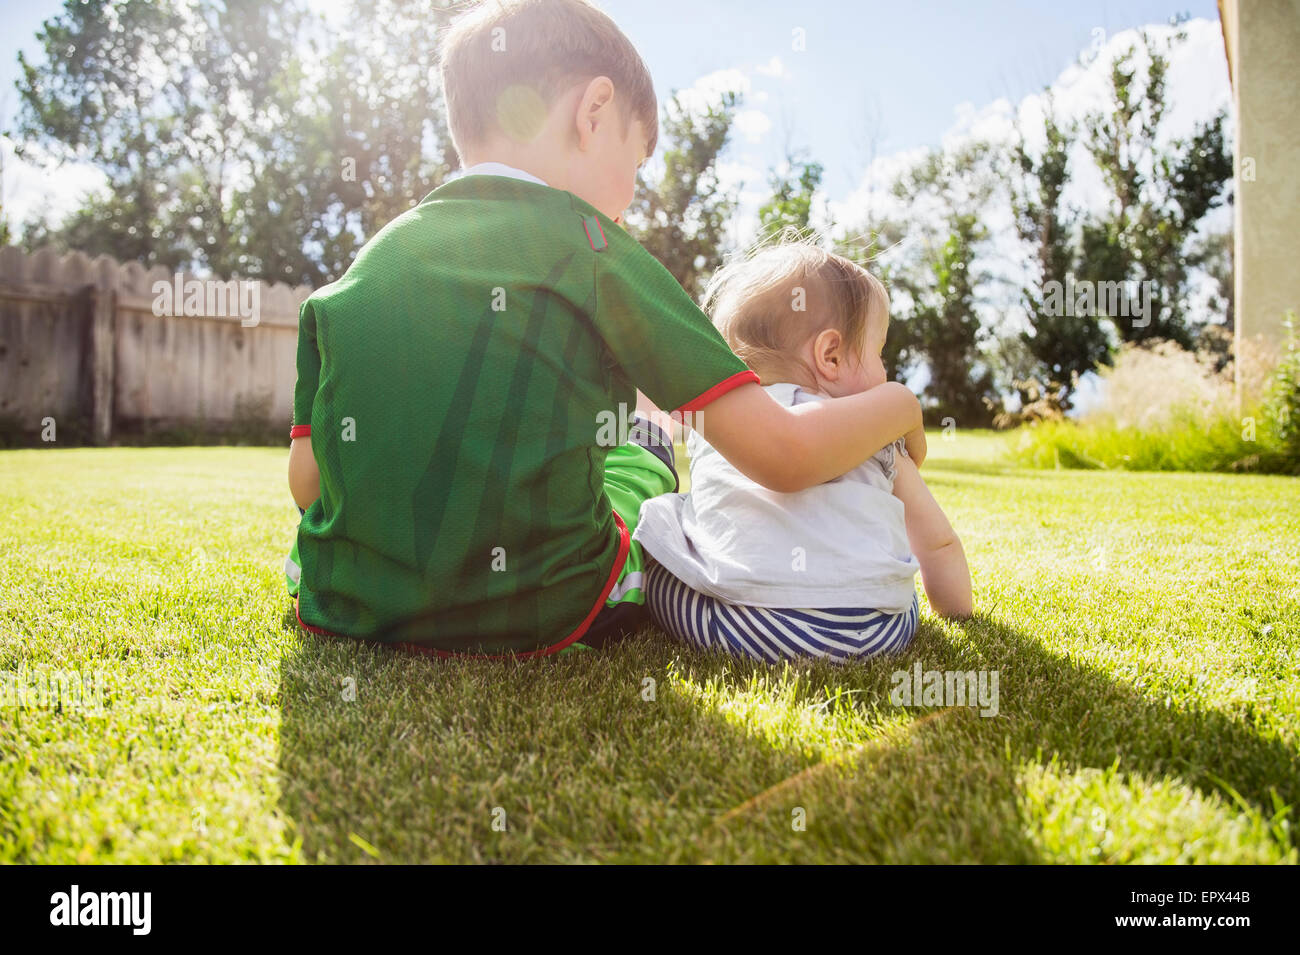 USA, Colorado, Brother (6-7) and sister (6-11months) sitting in grass Stock Photo